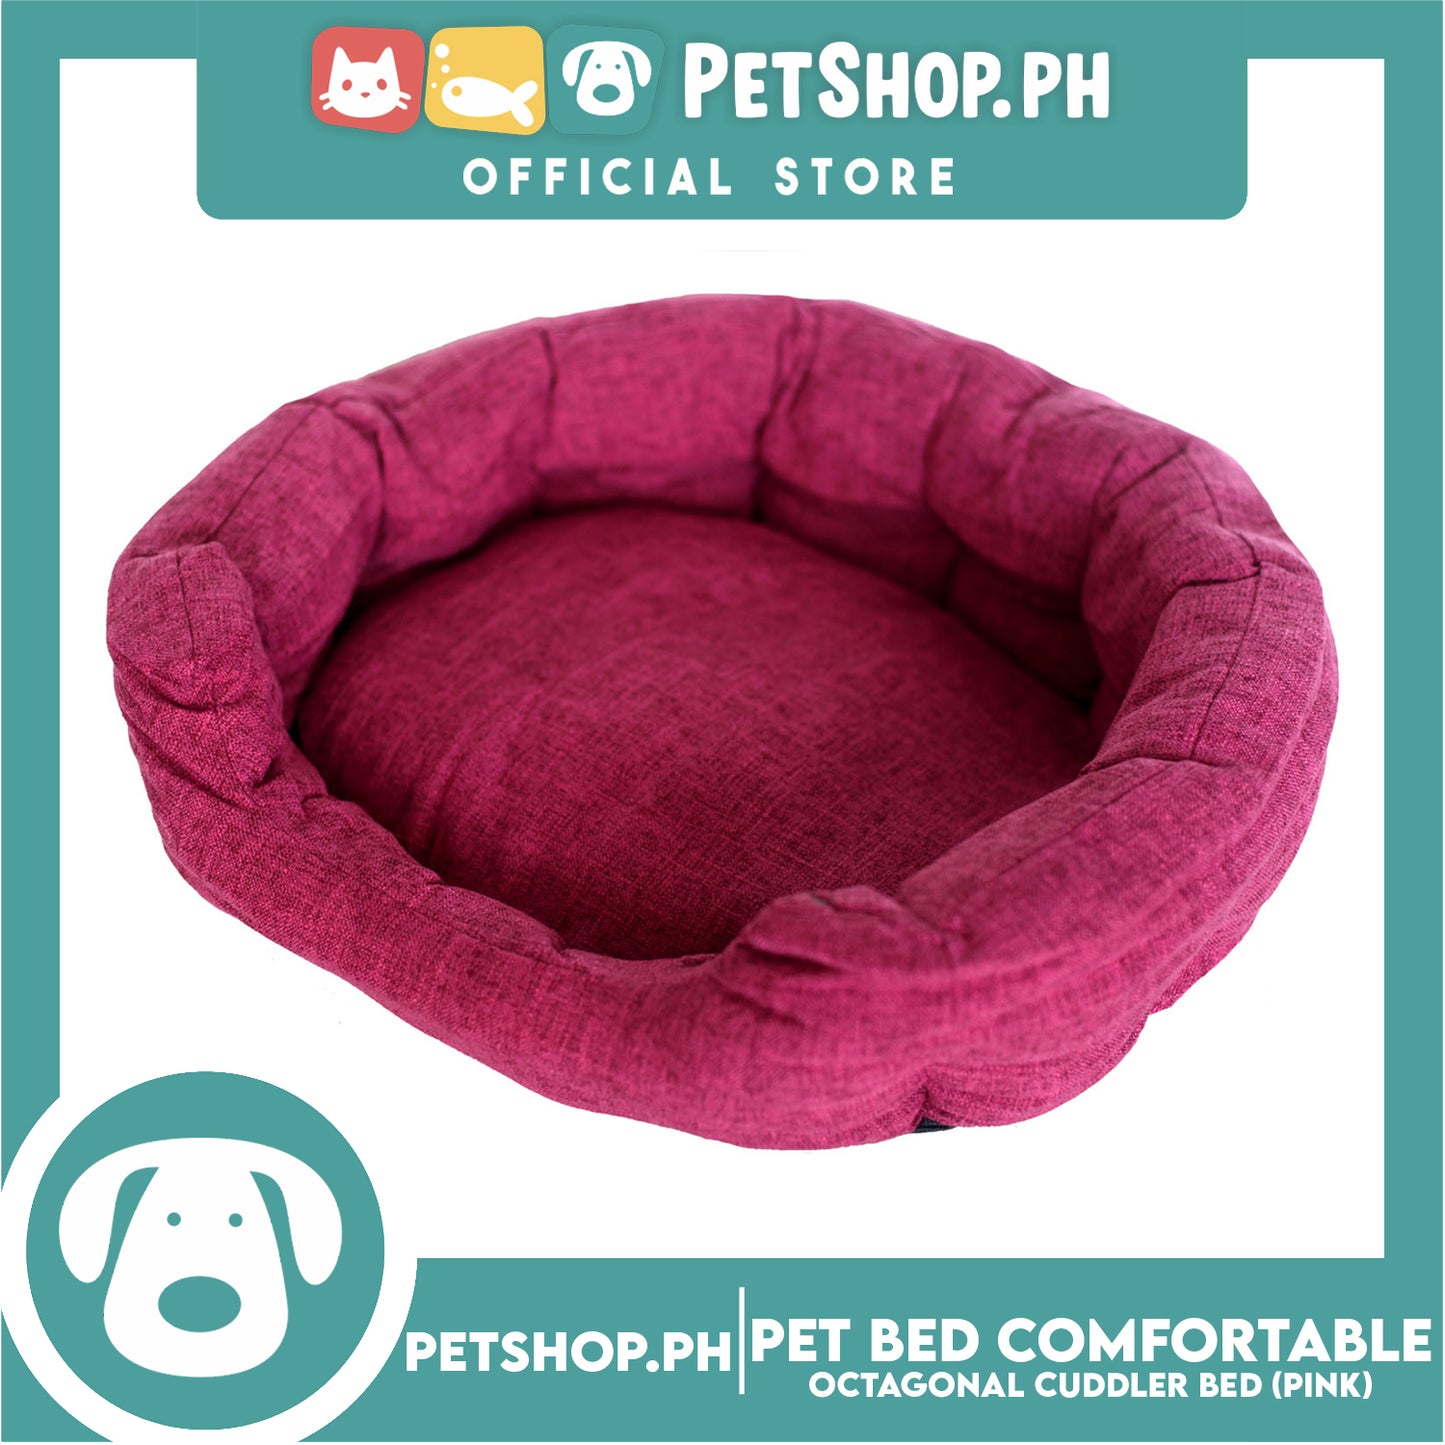 Pet Bed Comfortable Octagonal Cuddler Dog Bed 65x60x18cm Large for Dogs & Cats (Pink)